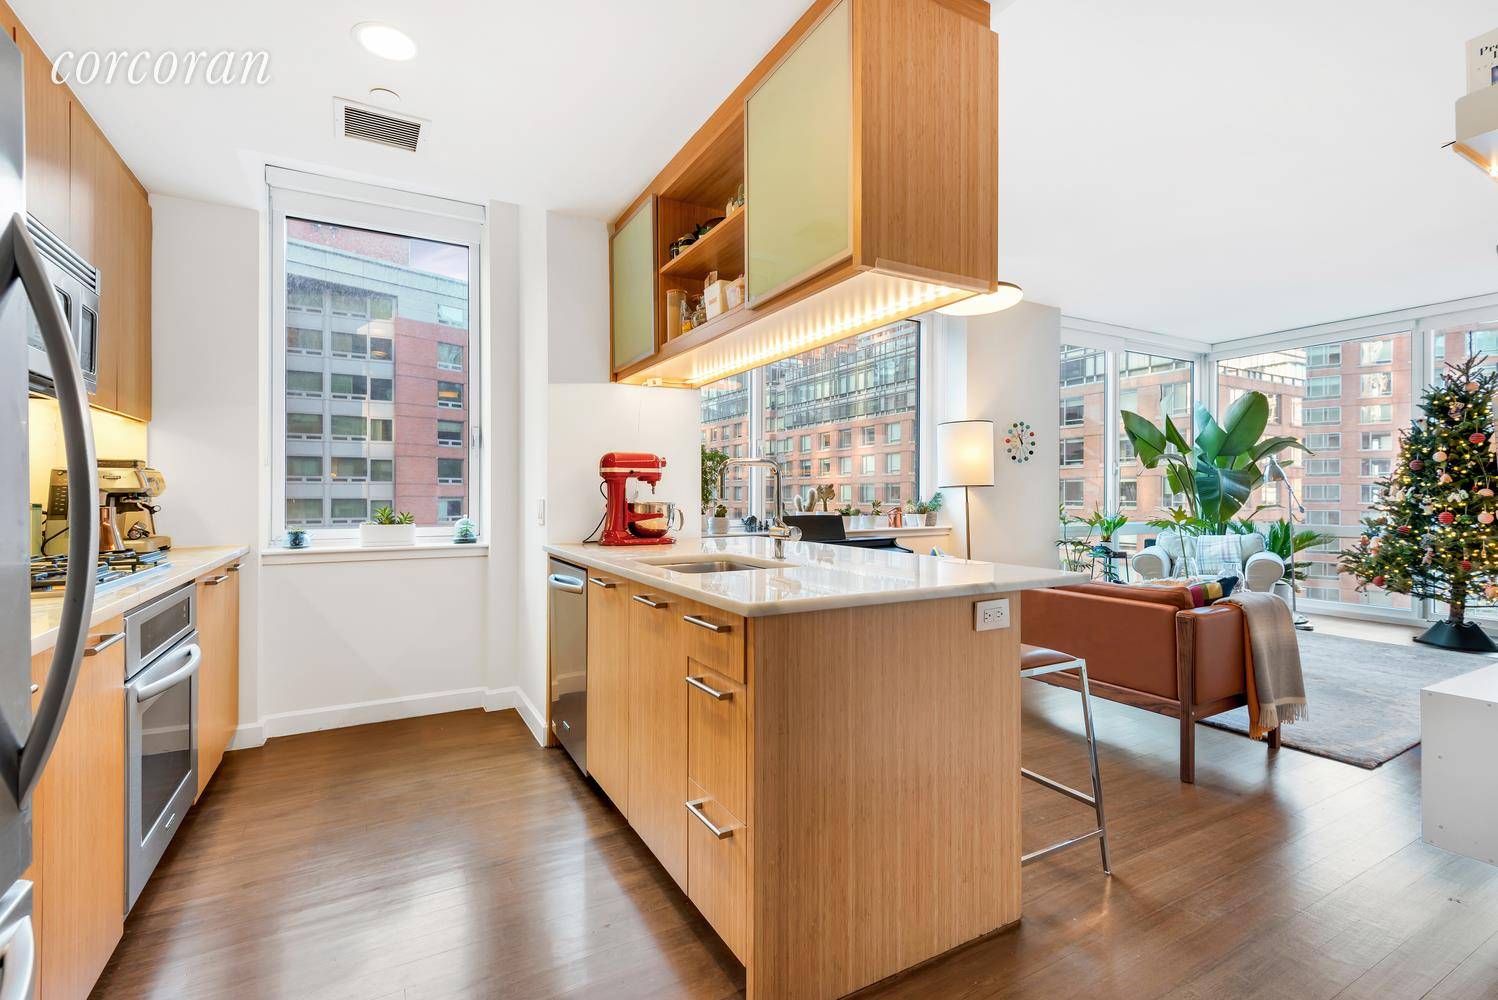 Exquisite 3 BR 3 BA Corner ApartmentSpacious, elegant, and majestic, this enormous 1, 481 square ft apartment features floor to ceiling windows, marble counter tops, Viking stainless steel appliances, bamboo ...